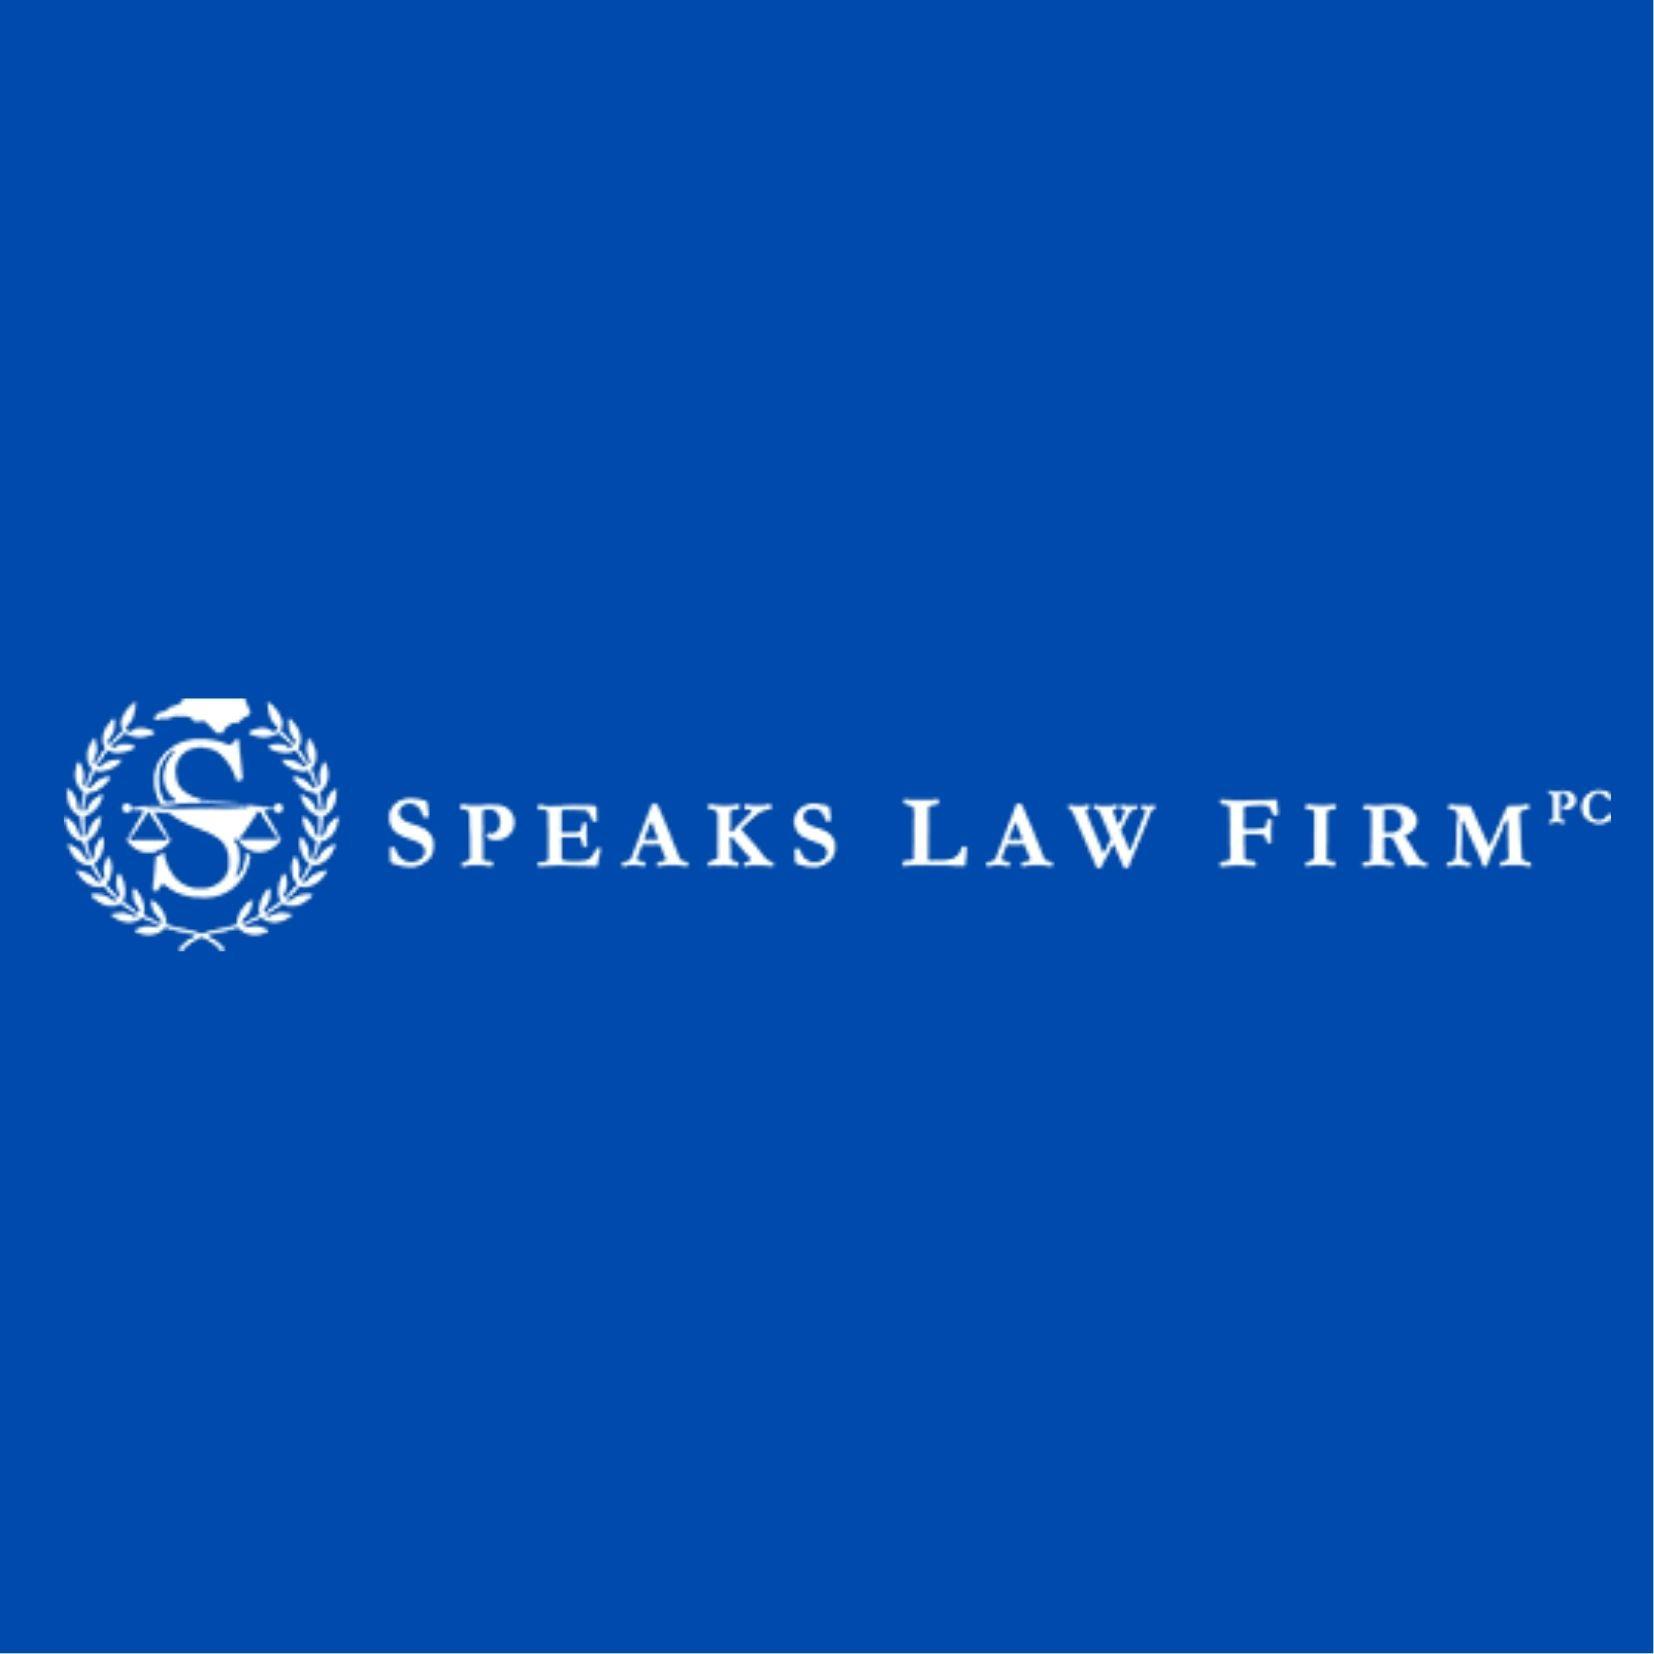 Speaks Law Firm - Charlotte, NC 28216 - (980)291-6656 | ShowMeLocal.com